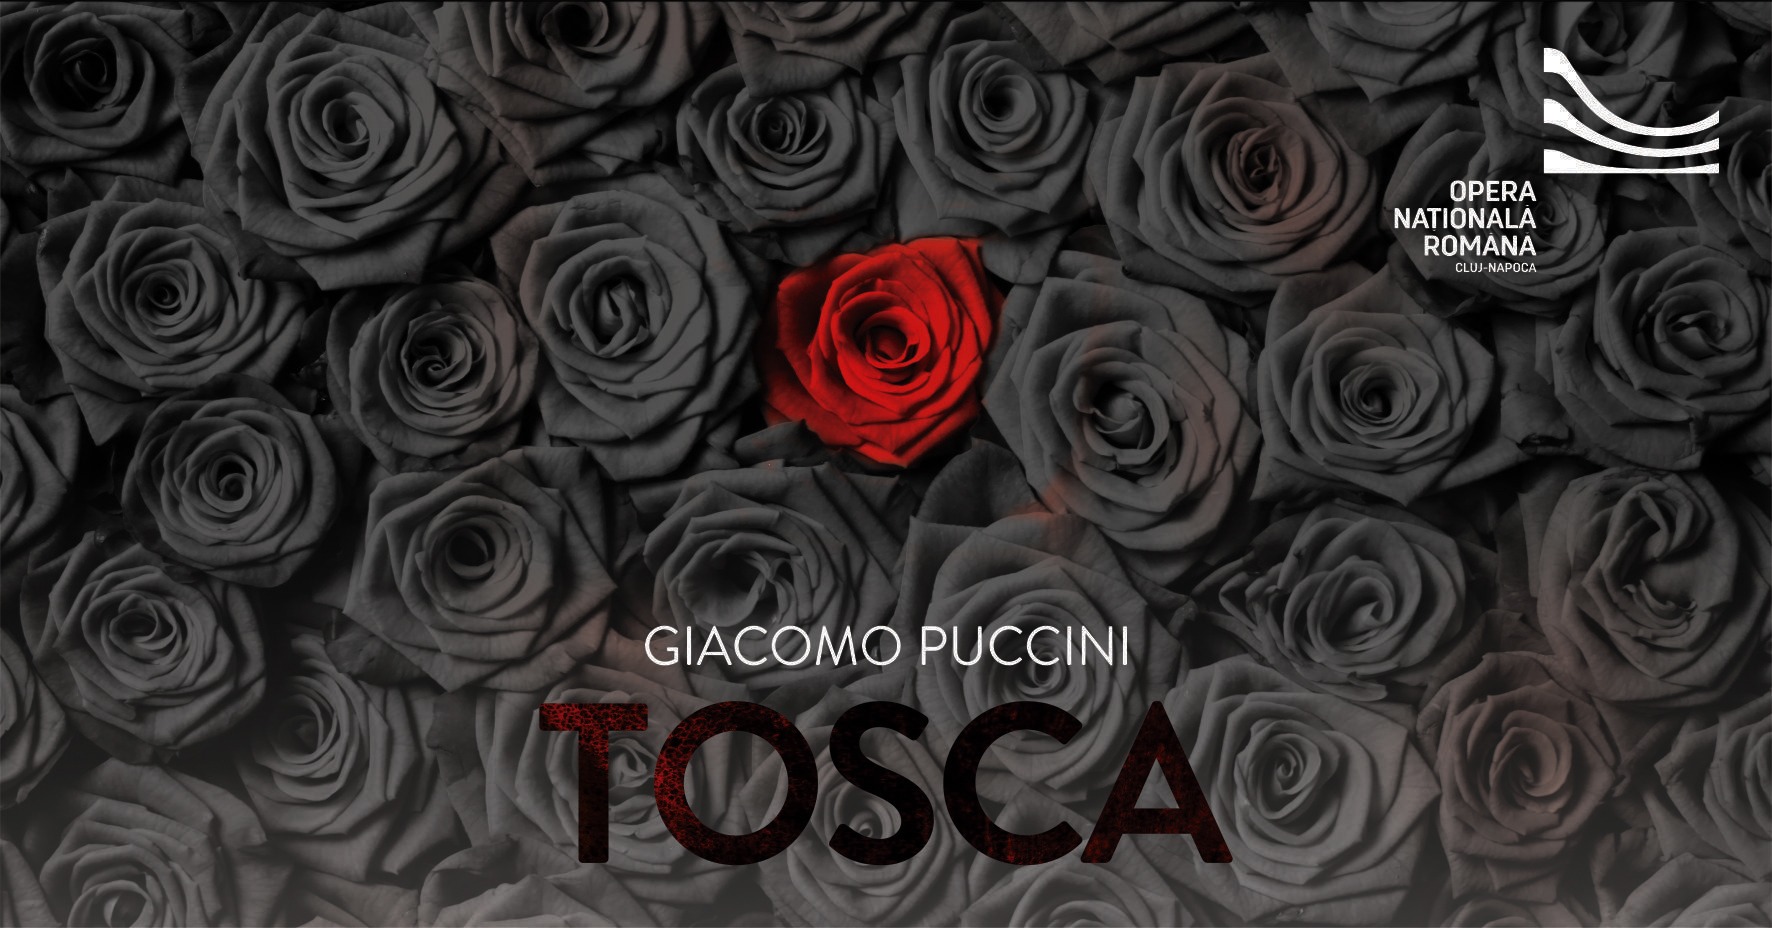 tosca g. puccini